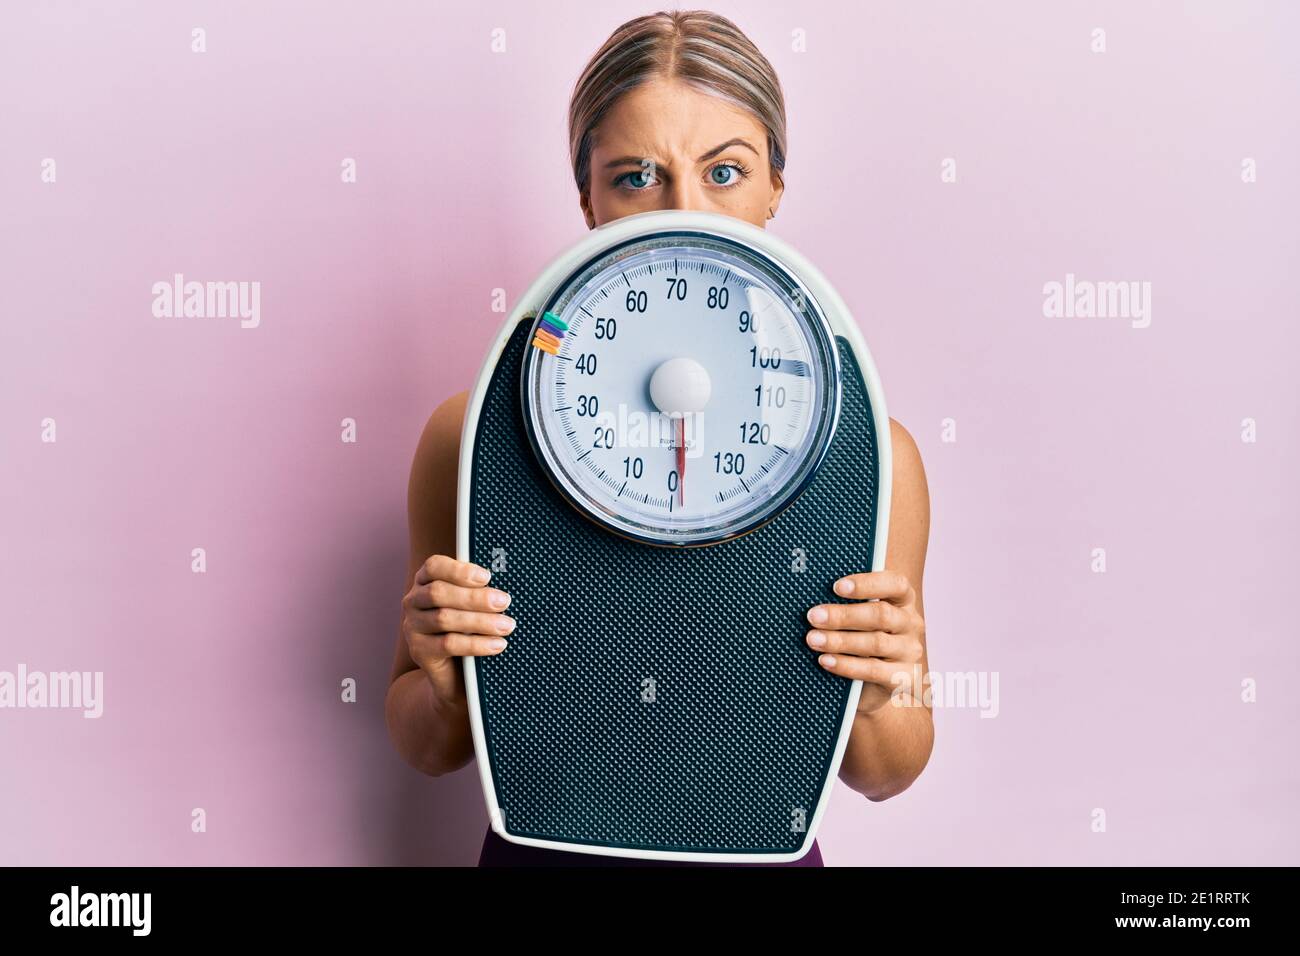 https://c8.alamy.com/comp/2E1RRTK/beautiful-blonde-woman-holding-weight-machine-to-balance-weight-loss-skeptic-and-nervous-frowning-upset-because-of-problem-negative-person-2E1RRTK.jpg